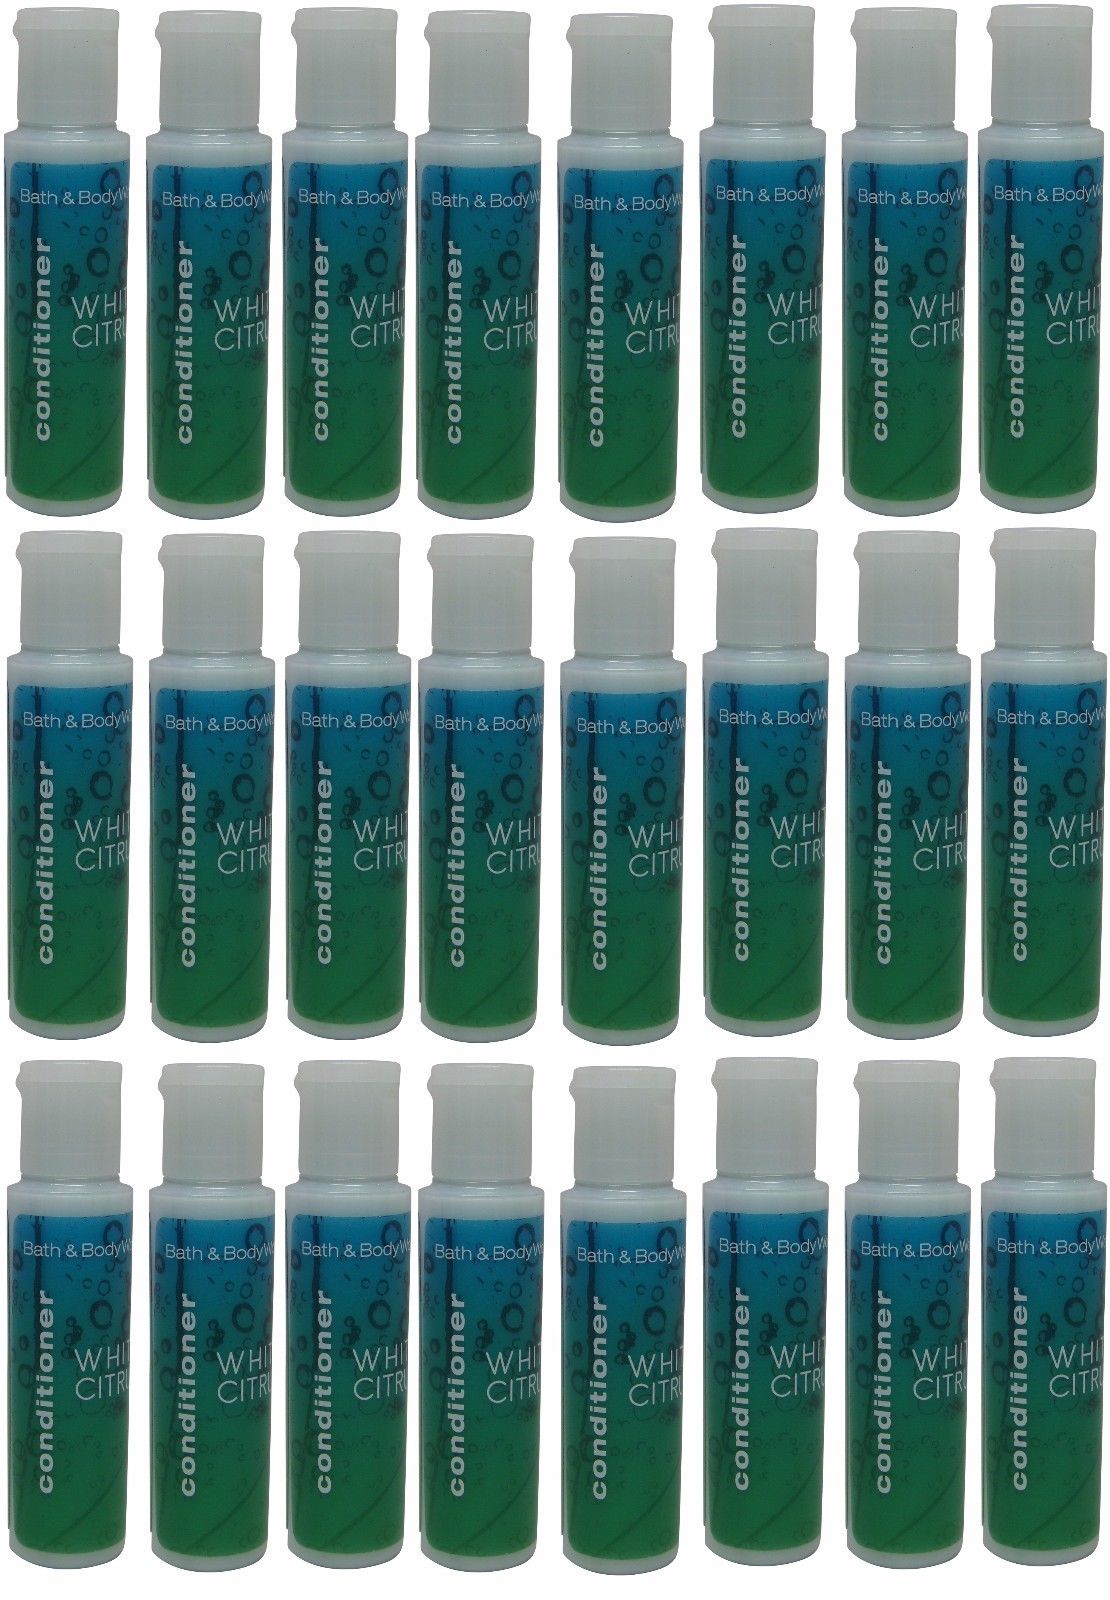 Bath & Body Works White Citrus Conditioner Lot of 24 Featured @ Holiday Express